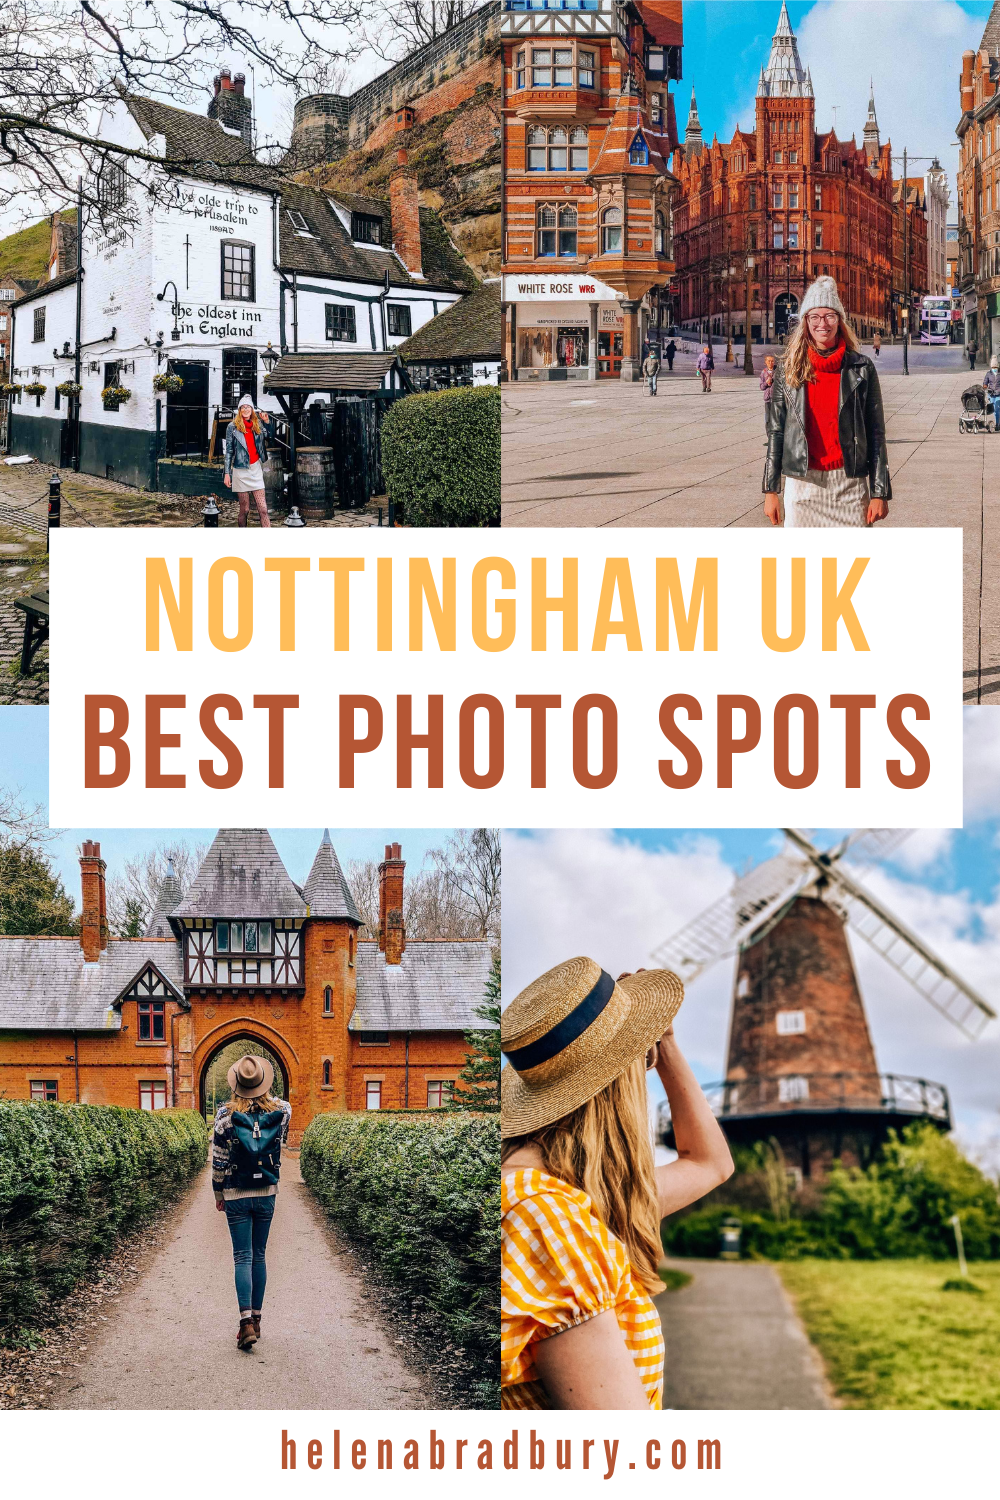 Use this Nottingham Instagram Guide to find the best photo spots and instagrammable places in Nottingham England | instagram spots nottingham | nottingham uk photography | nottingham photos | nottingham photoshoot | nottingham photography | nottingh…